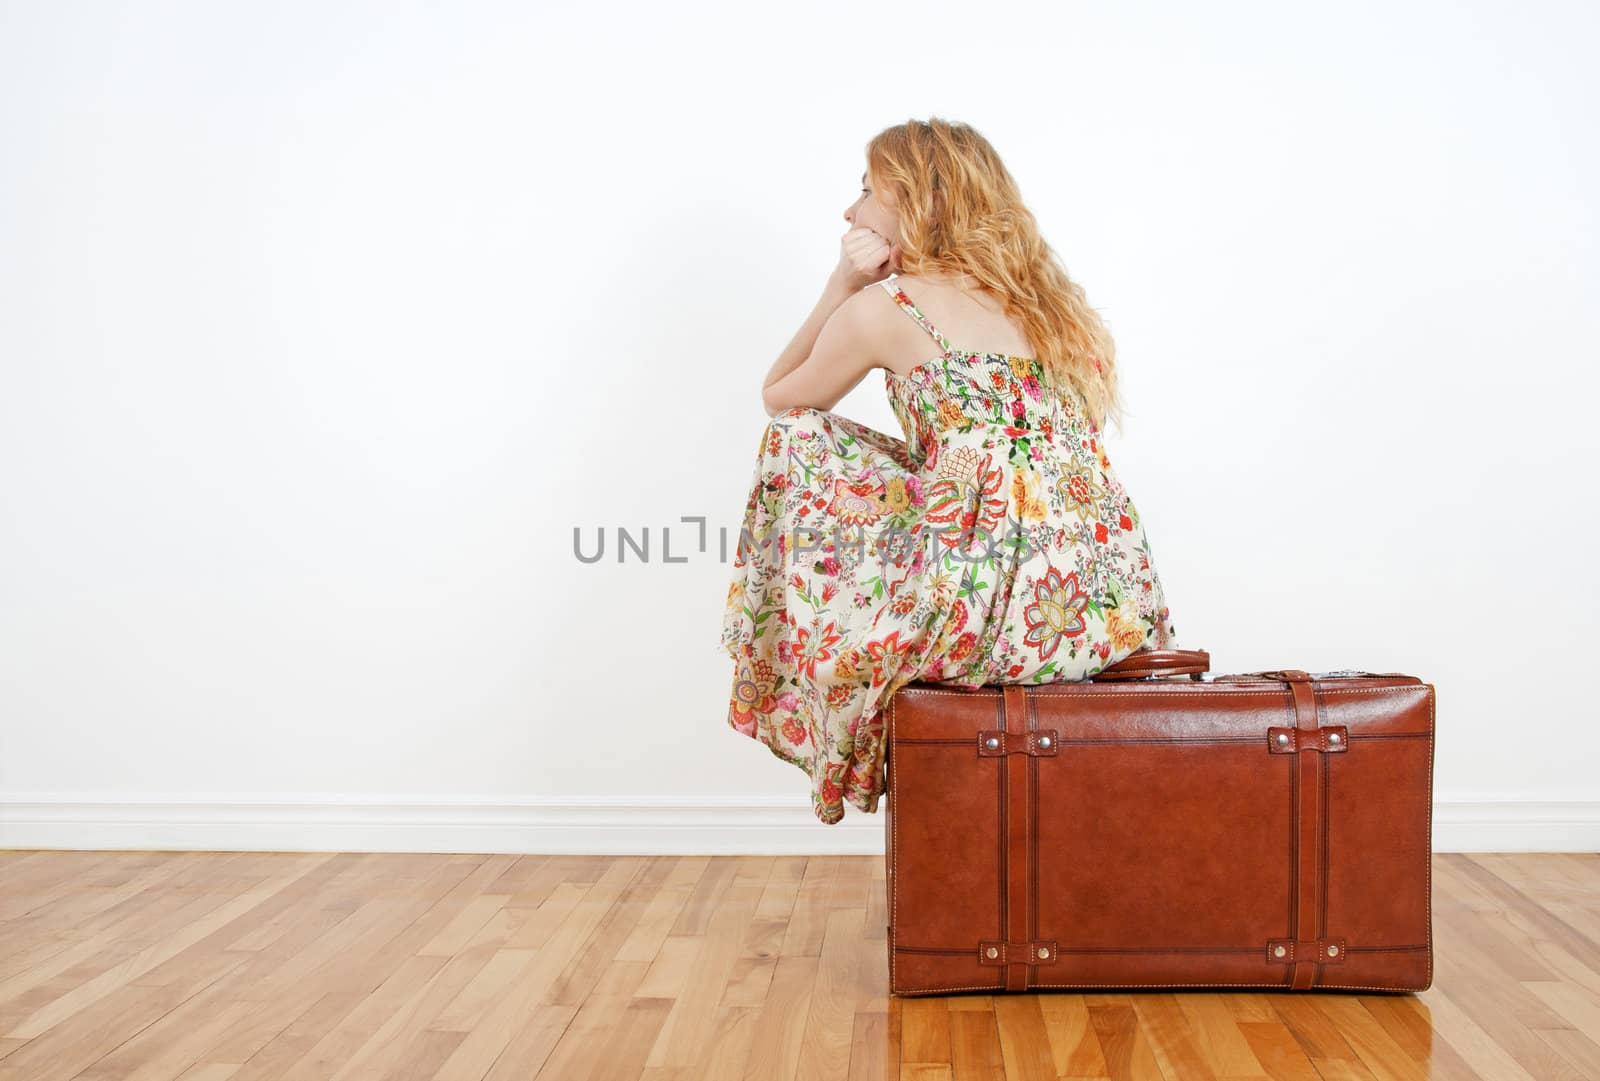 Girl sitting on a vintage suitcase anticipating travel by anikasalsera